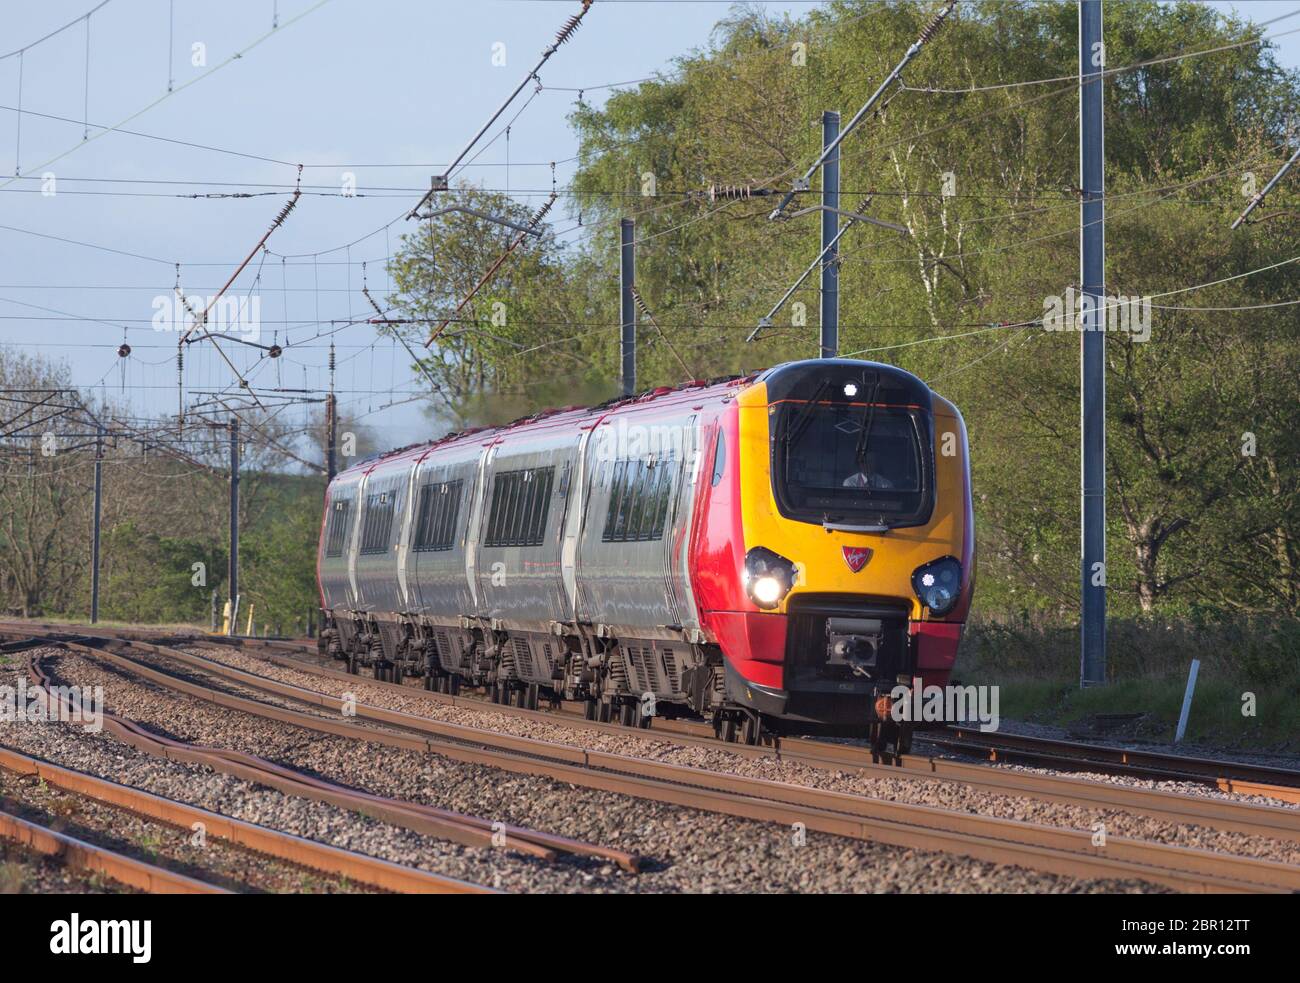 Virgin trains class 221 Bombardier super voyager diesel train 221111  on the electrified west coast mainline Stock Photo